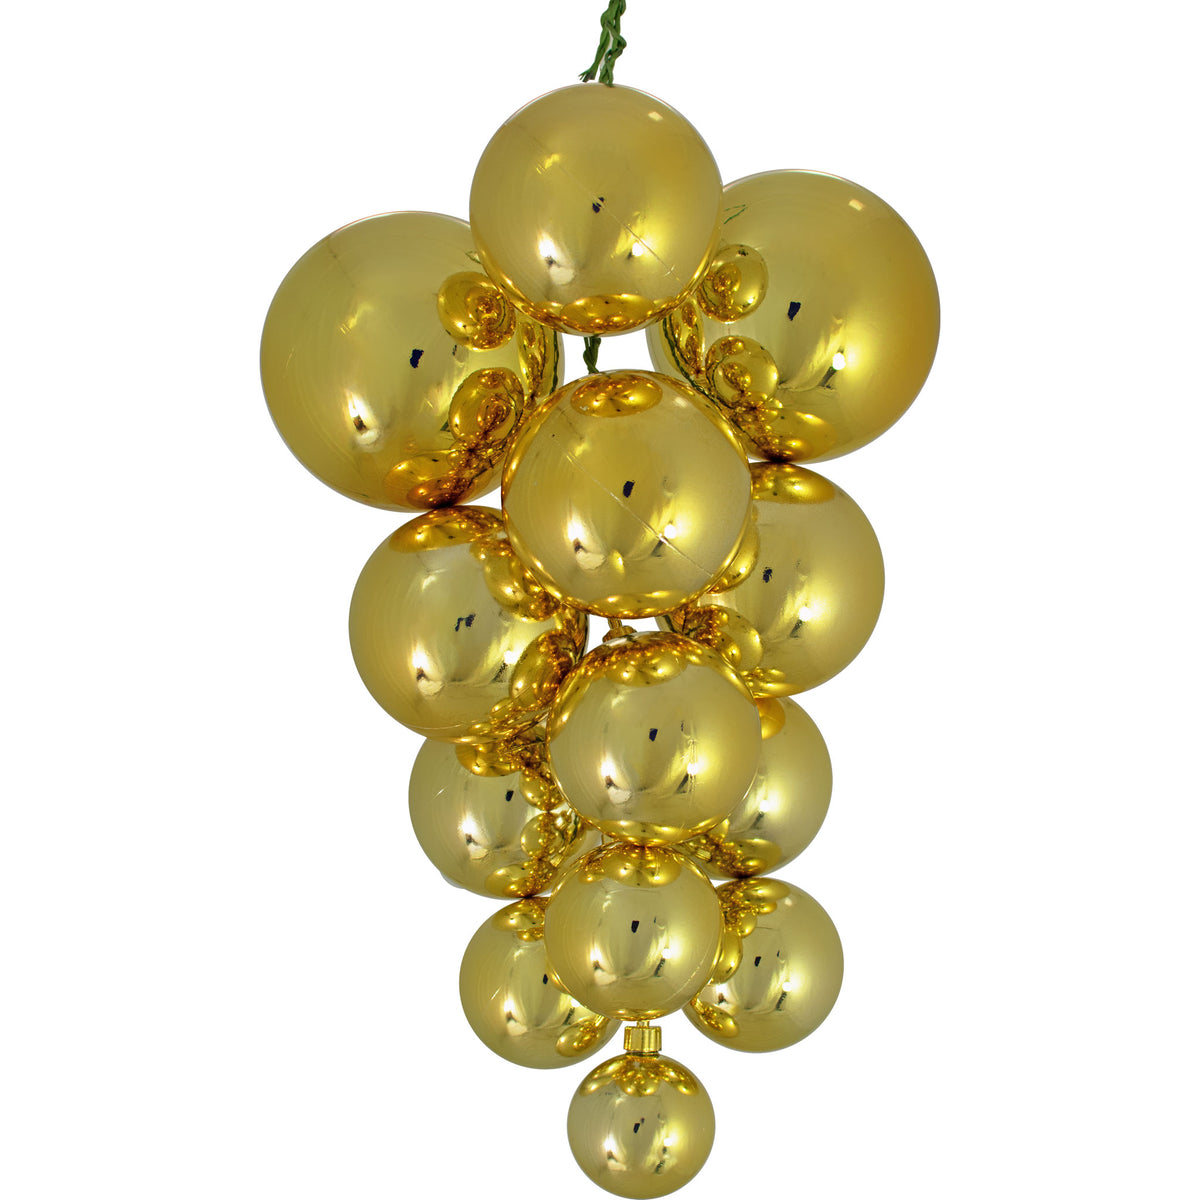 The Palm Spring Shiny Gold Ball Clusters comes with 13 shiny gold ball ornaments.